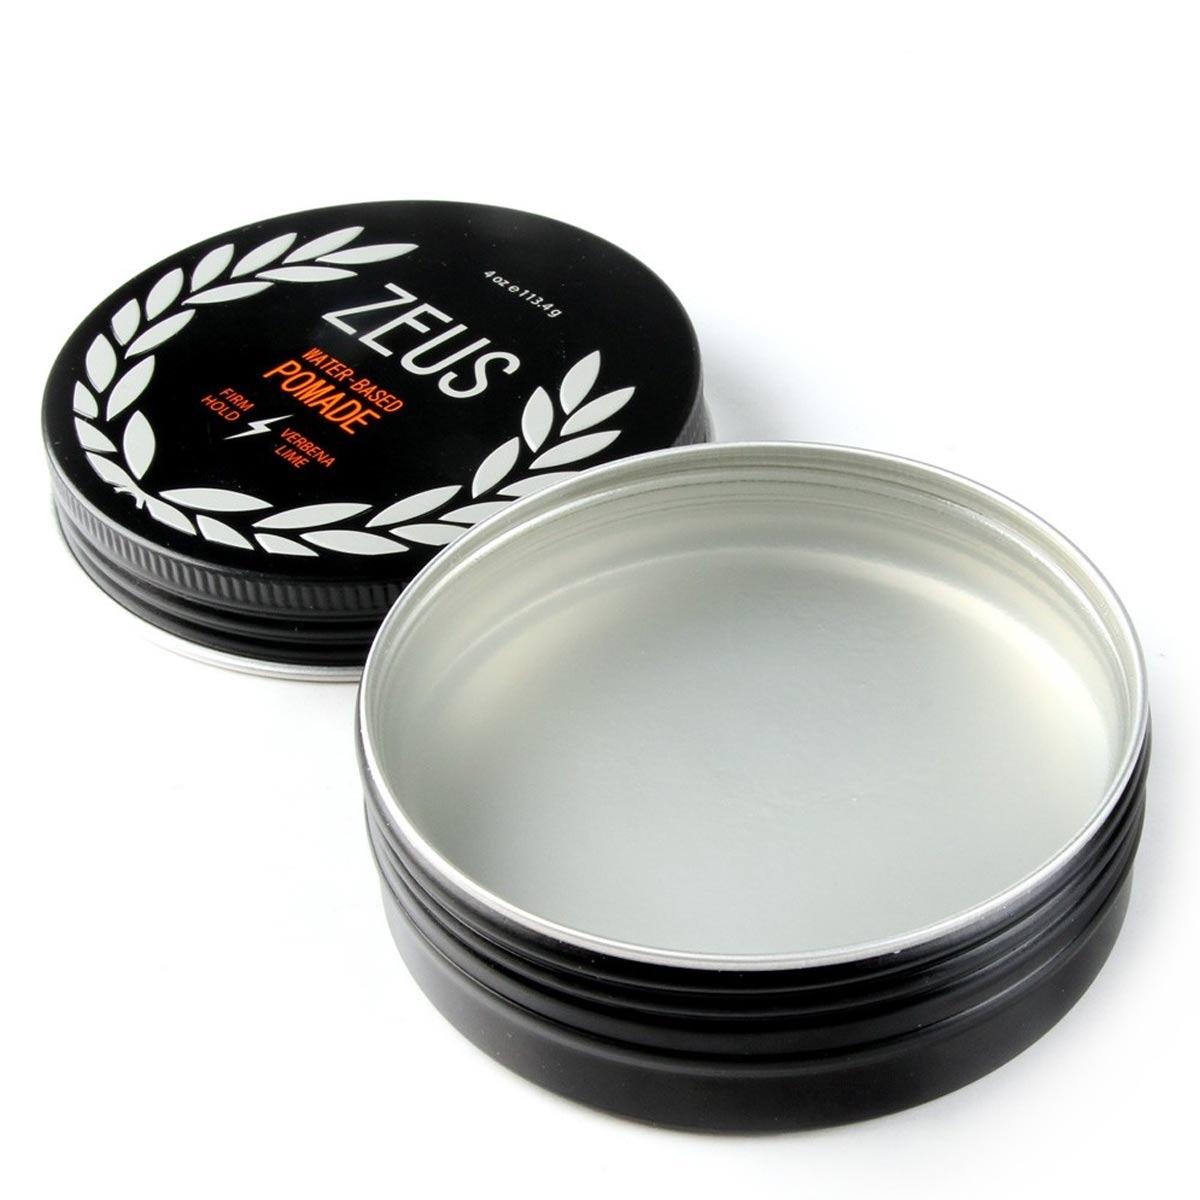 Primary image of Firm Hold Pomade